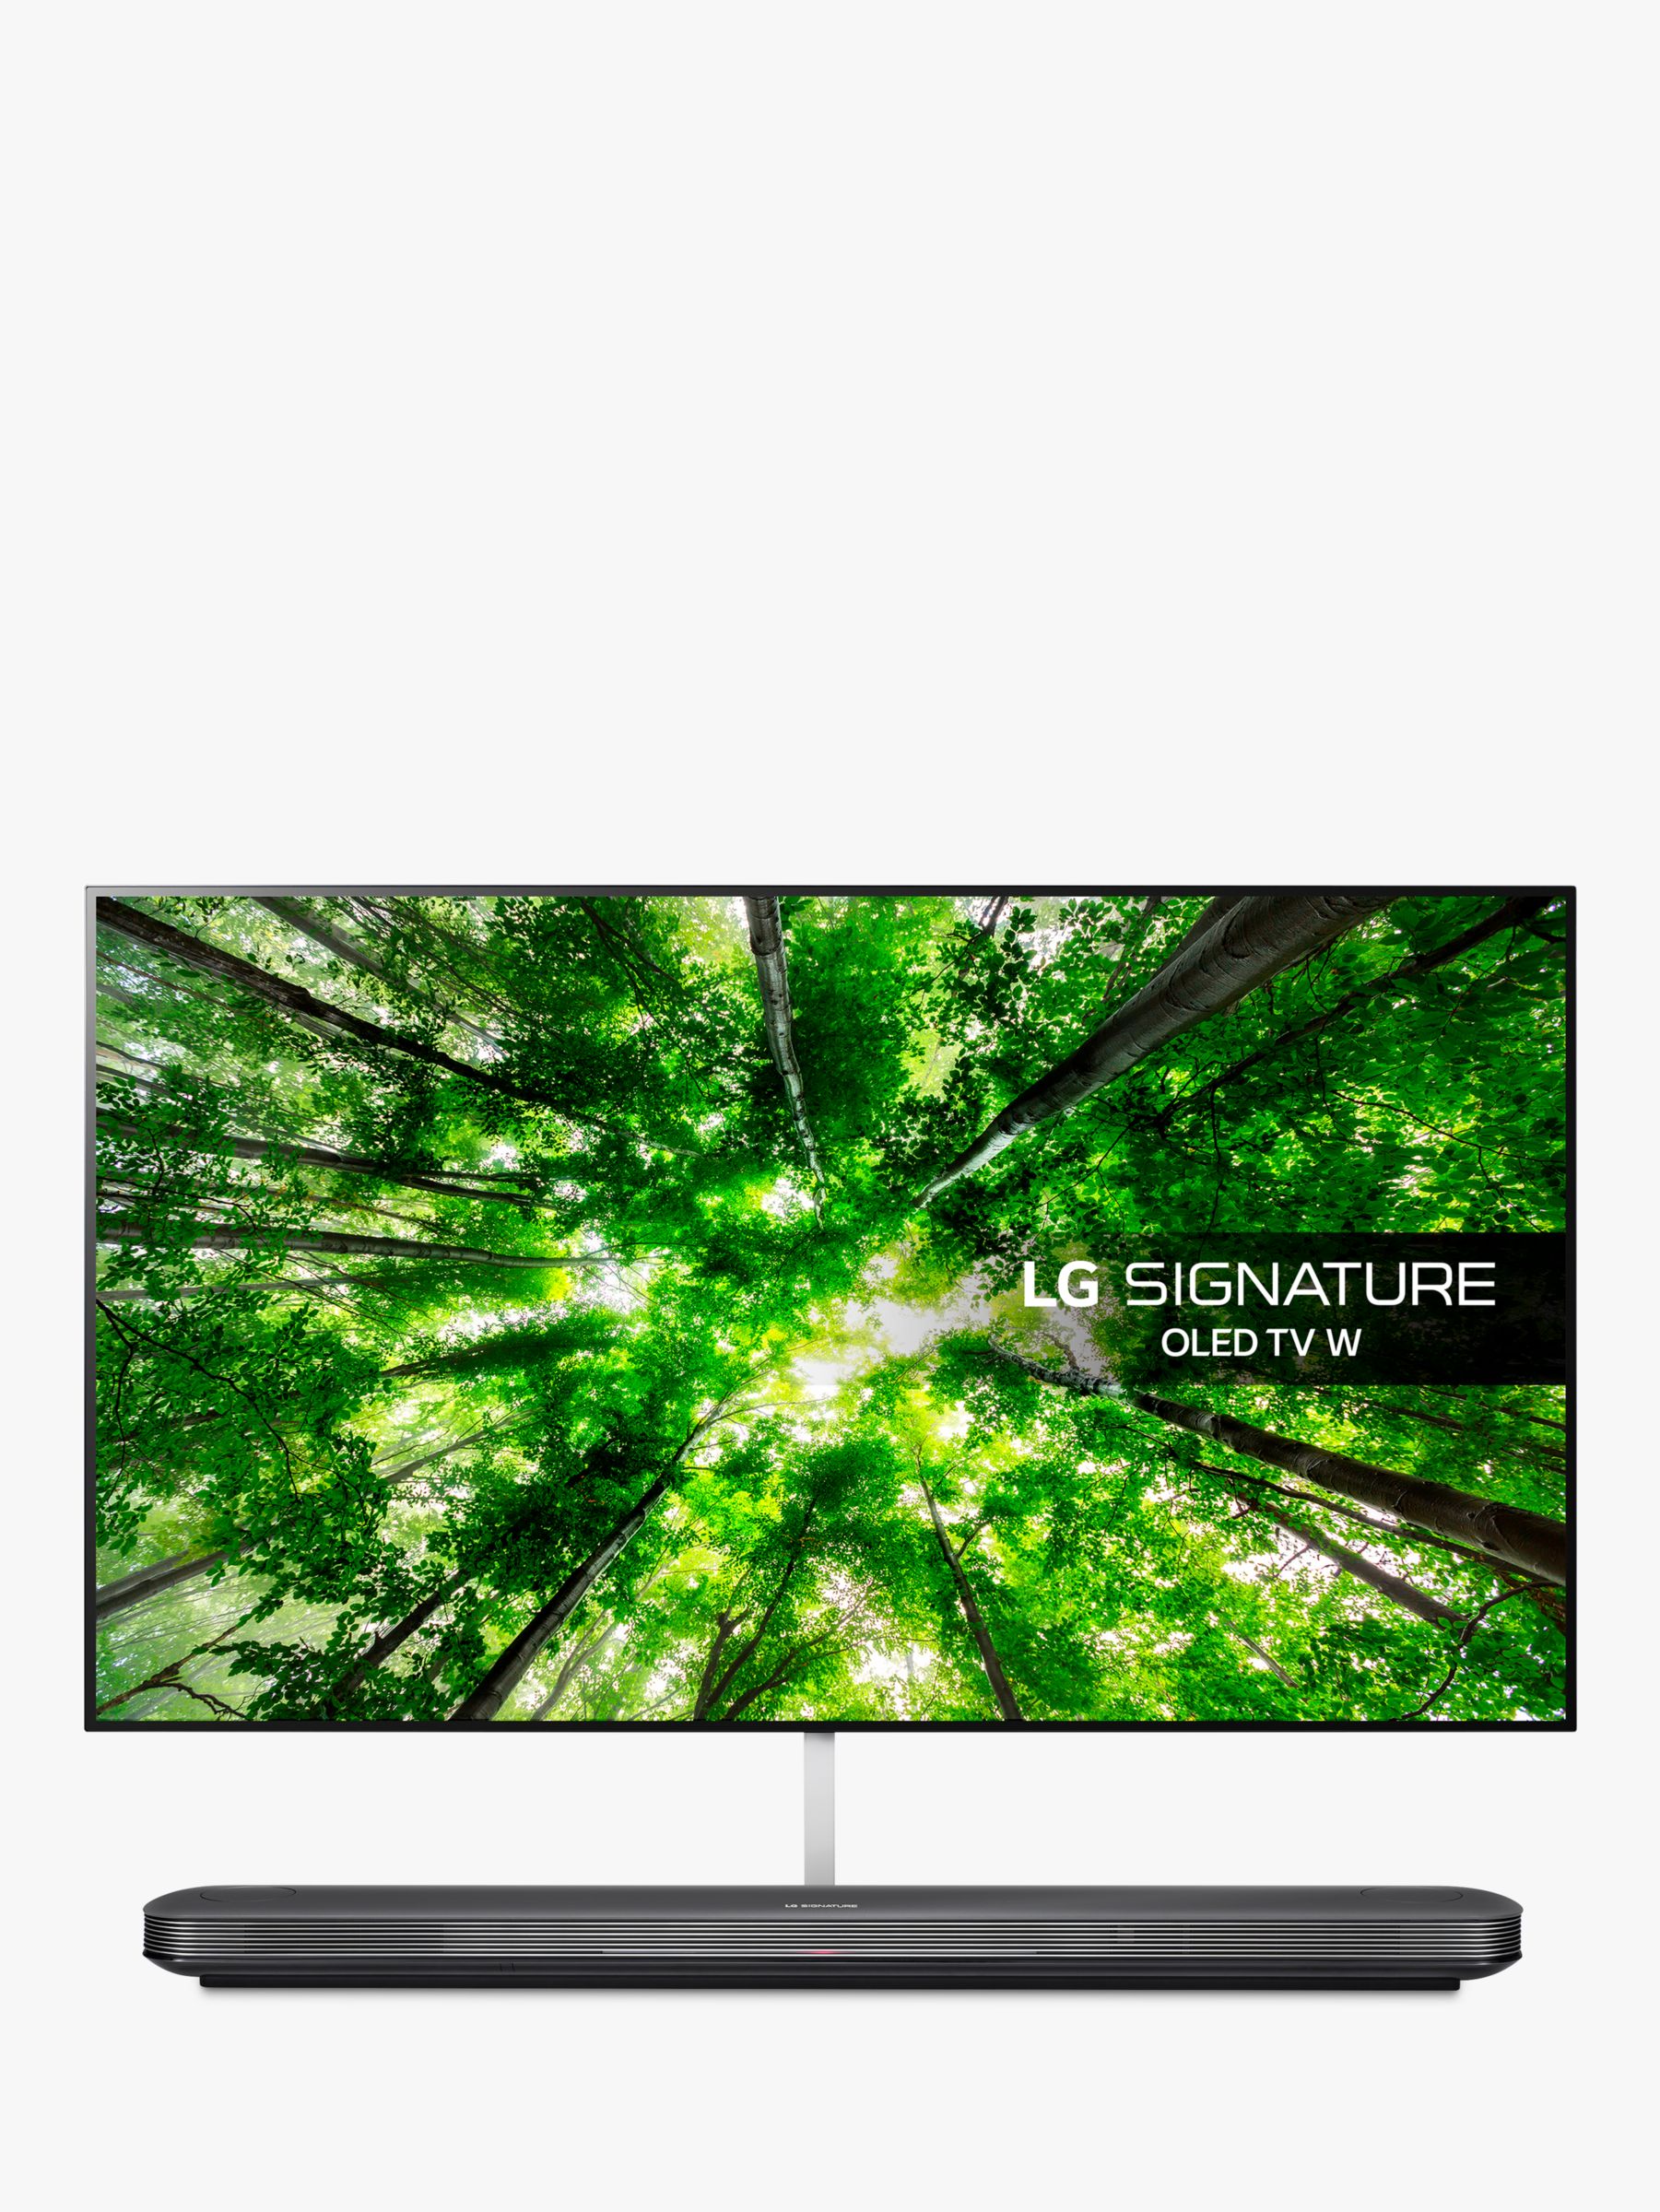 LG OLED77W8PLA Signature OLED HDR 4K Ultra HD Smart TV, 77 with Freeview Play/Freesat HD, Picture-On-Wall Design & Dolby Atmos Sound Base Unit, Ultra HD Certified, Black